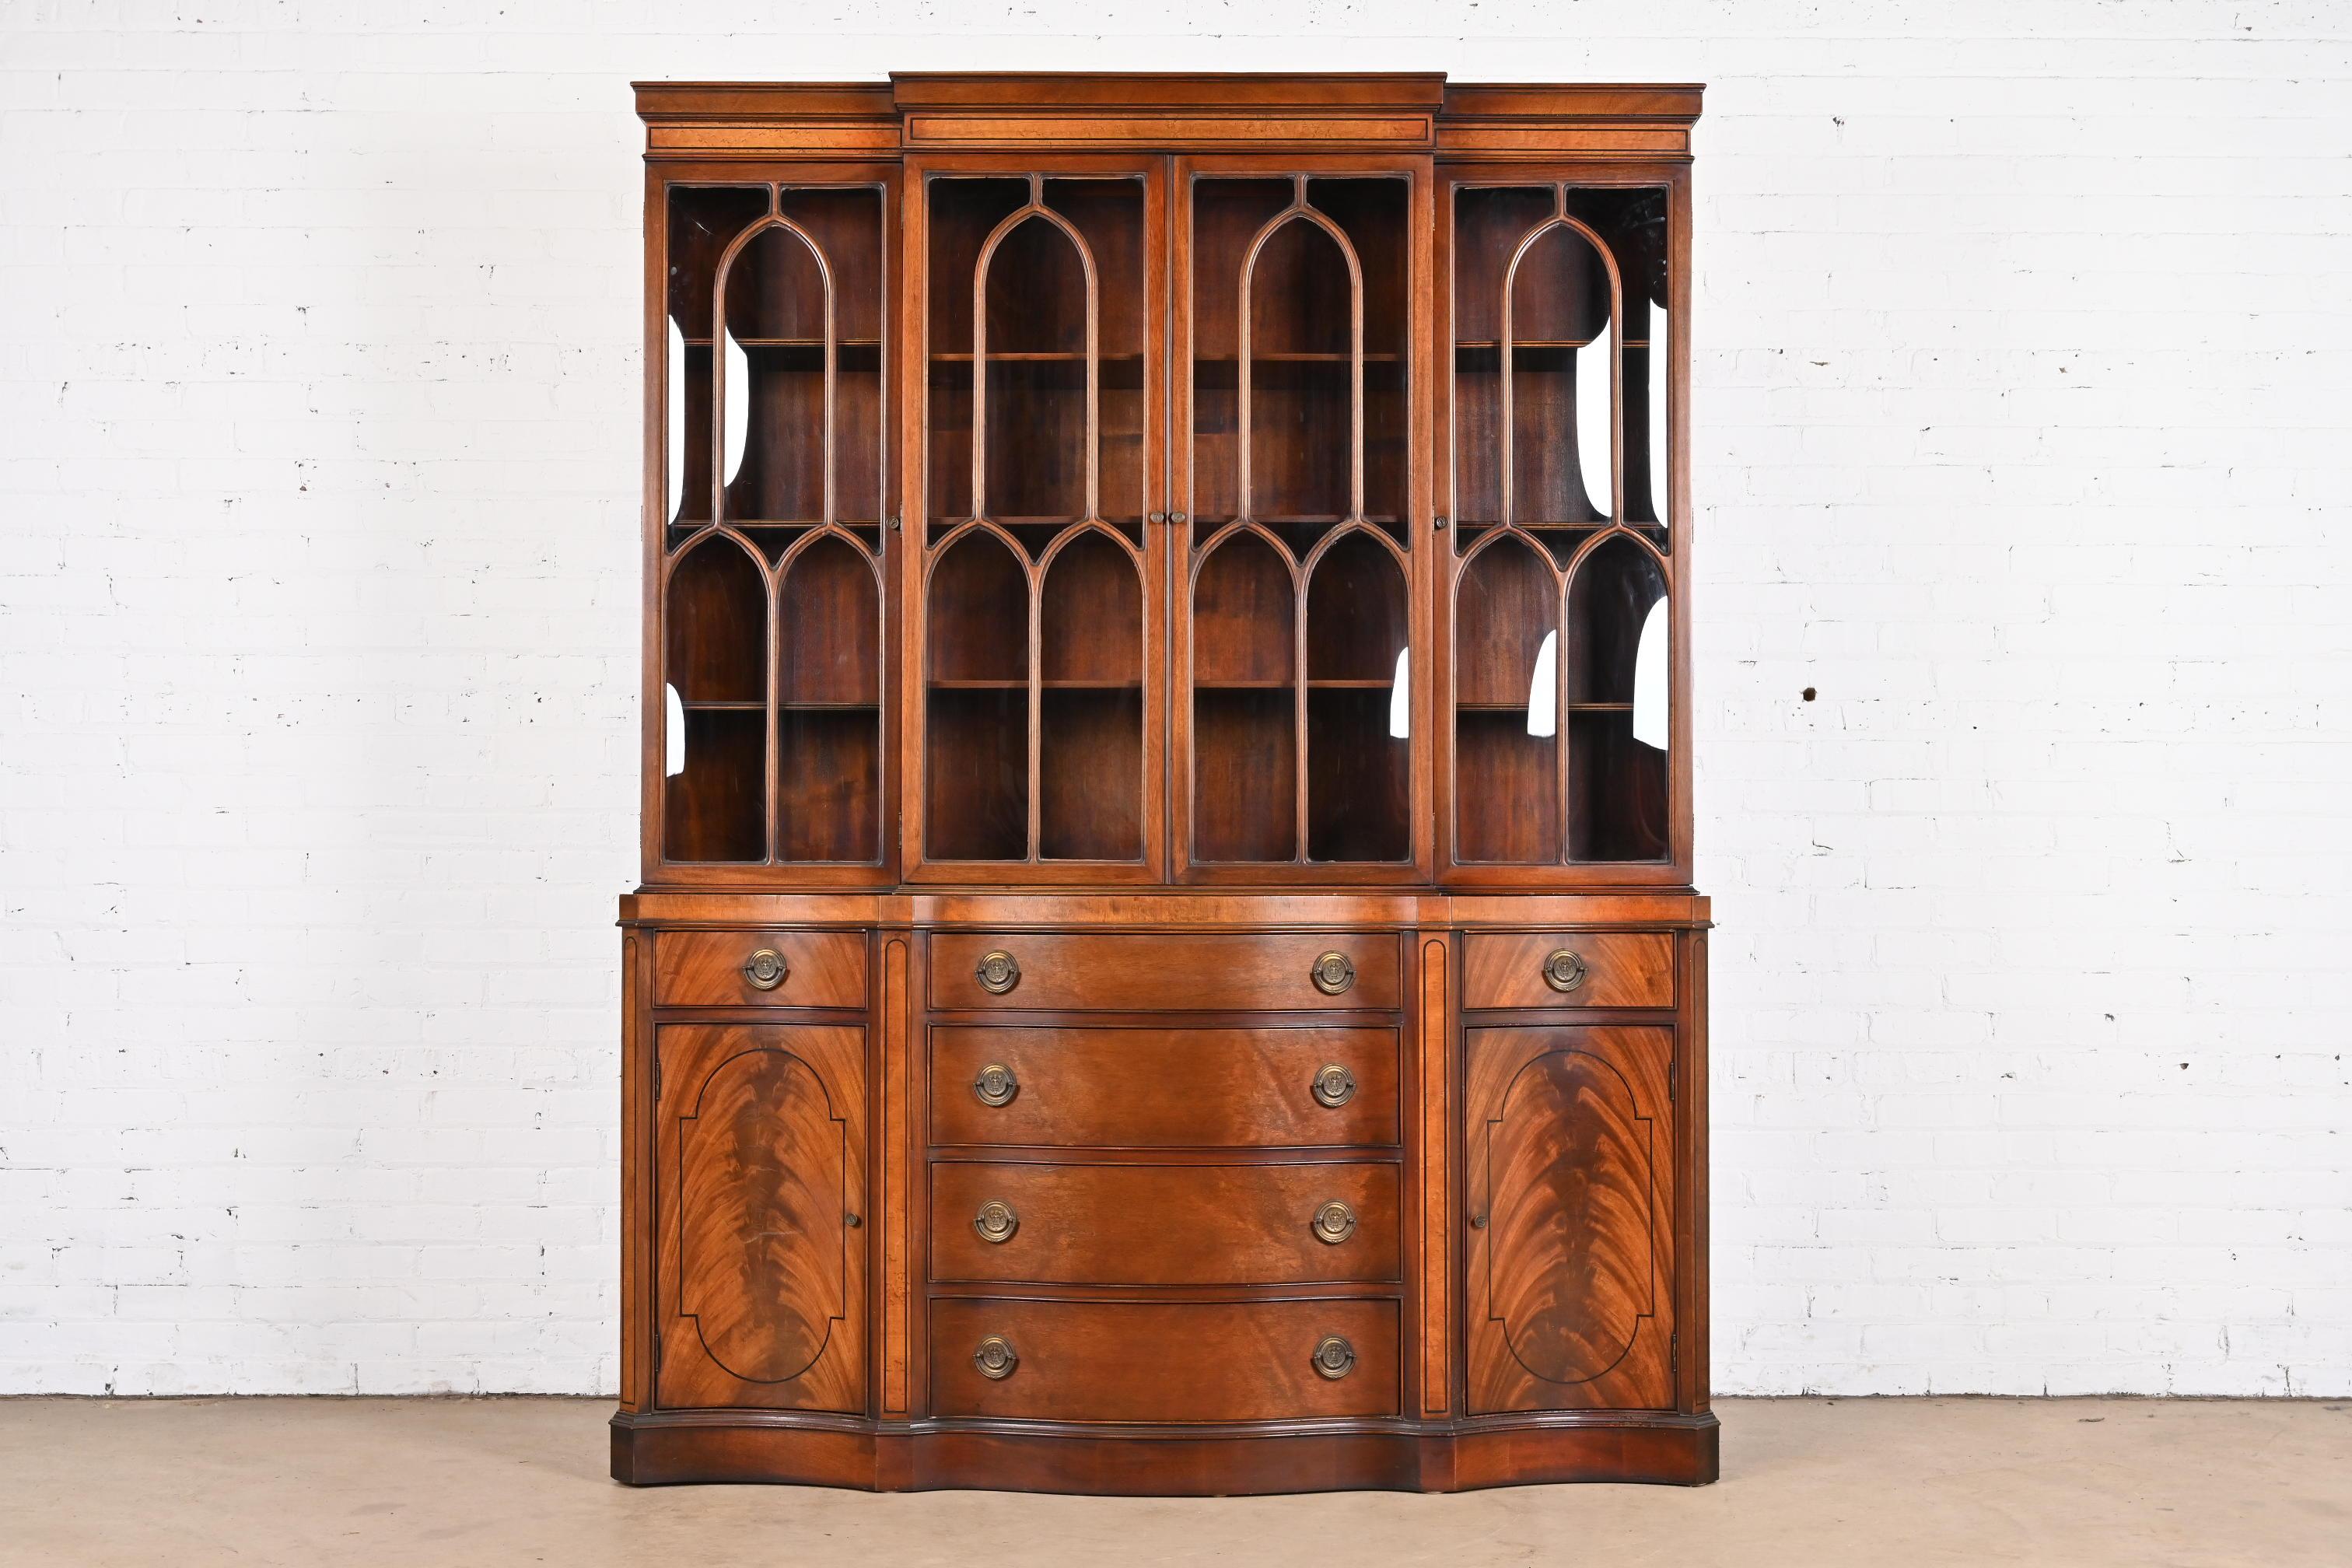 A gorgeous Georgian or Chippendale style breakfront bookcase or dining cabinet with secretary desk

In the manner of Baker Furniture

By Fancher

USA, Mid-20th Century

Beautiful flame mahogany, with ebony inlay, mullioned bubble glass front